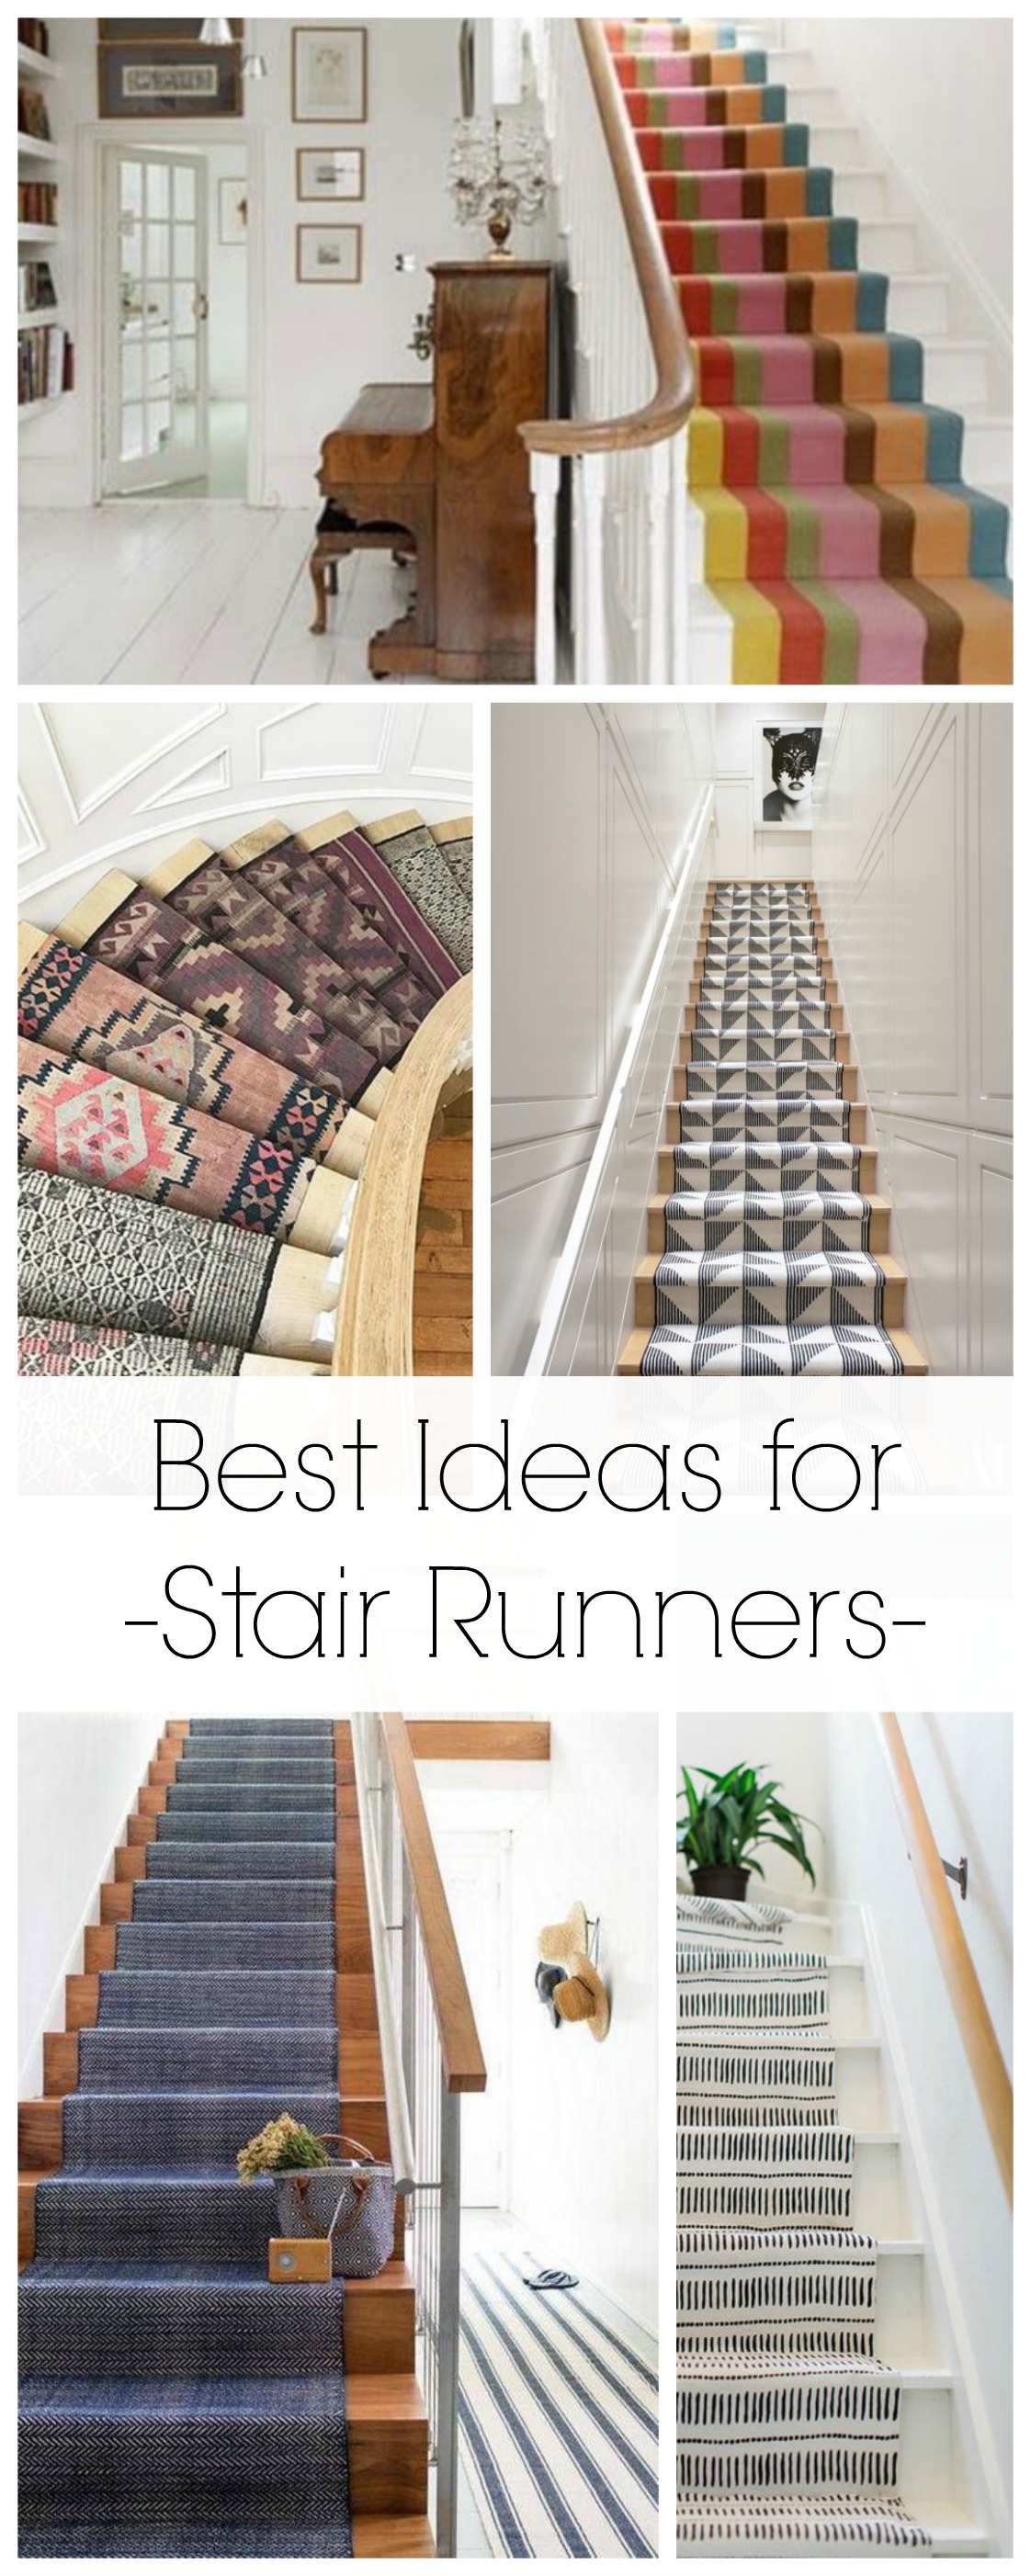 Stair Runners- Favorite Ideas for Rugs on Stairs